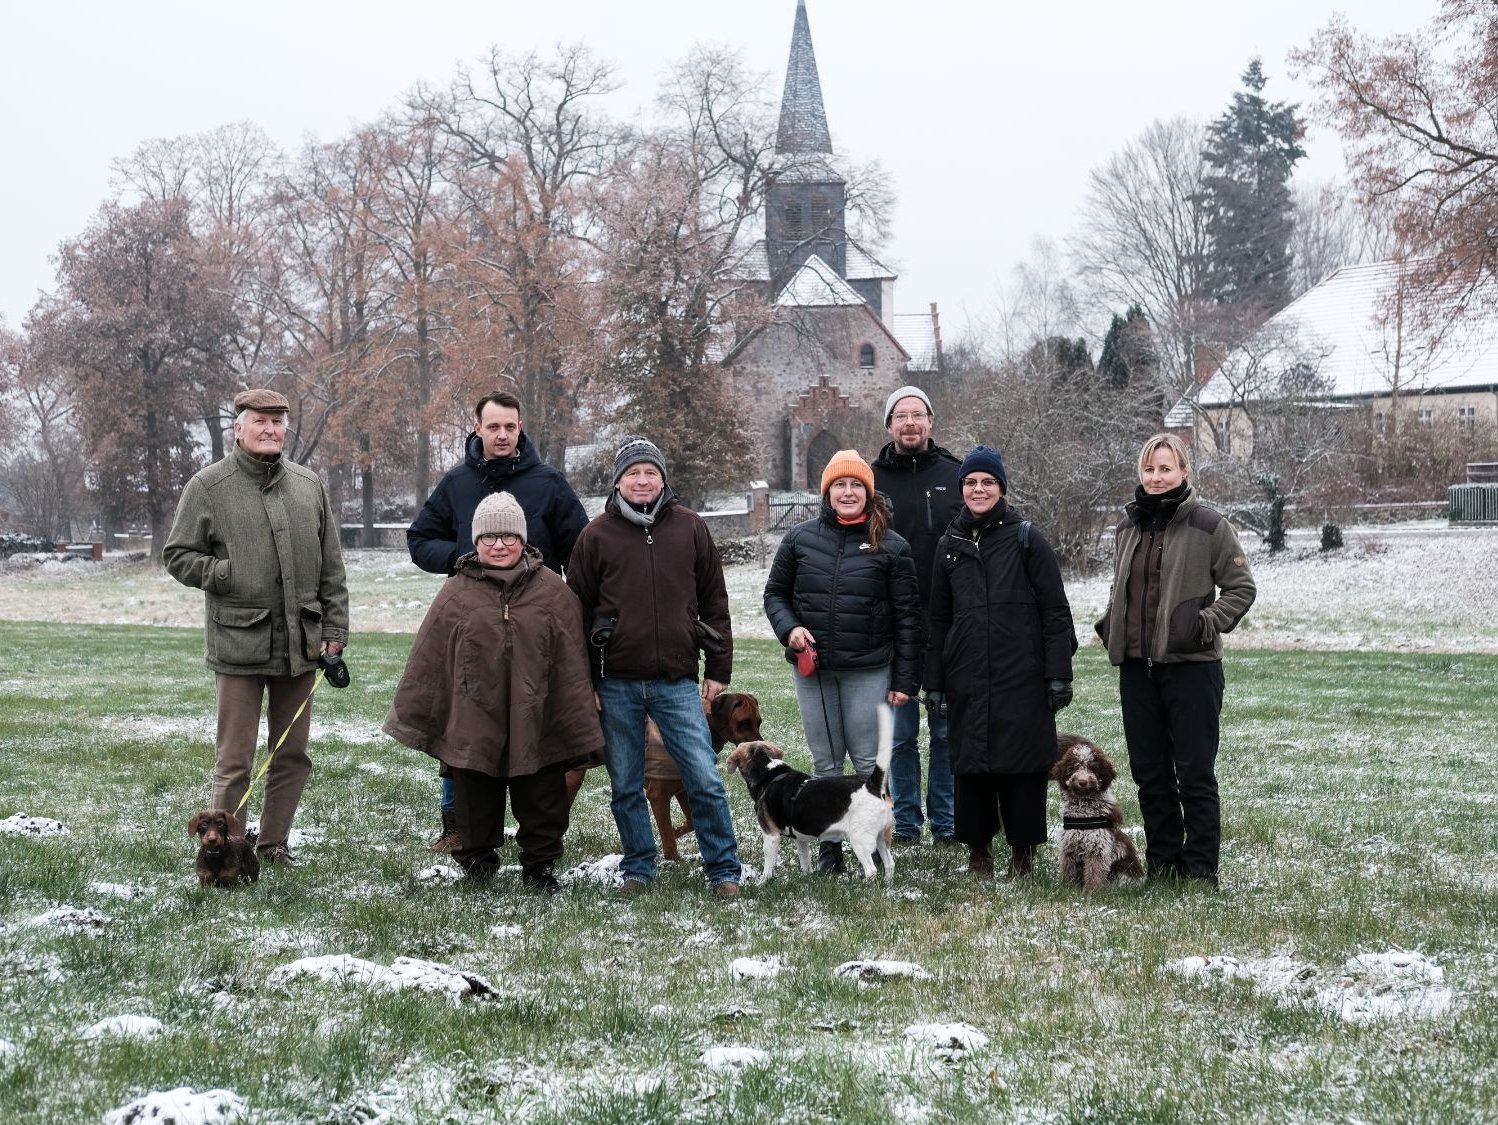 Group photo of The New Patrons' group of Sauen with Ateliers Pompiers, Judith Hopf and Florian Zeyfang and mediator Lea Schleiffenbaum on a field in winter